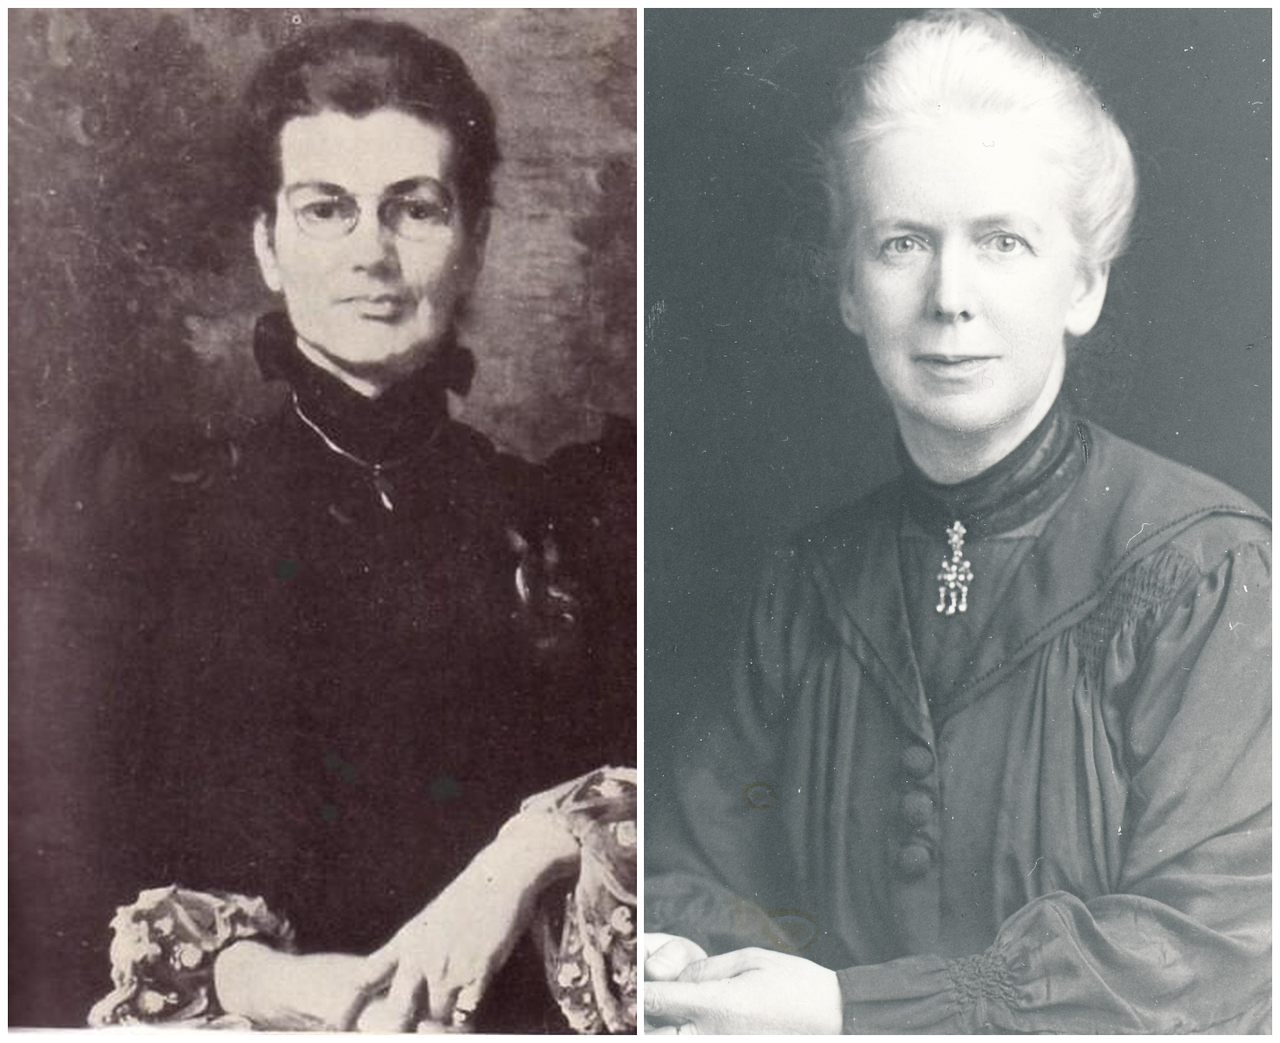 Charlotte Anne Moberly (left) was the vice-principal and Eleanor Frances Jourdain (right) was the principal at University of Oxford's college for women.